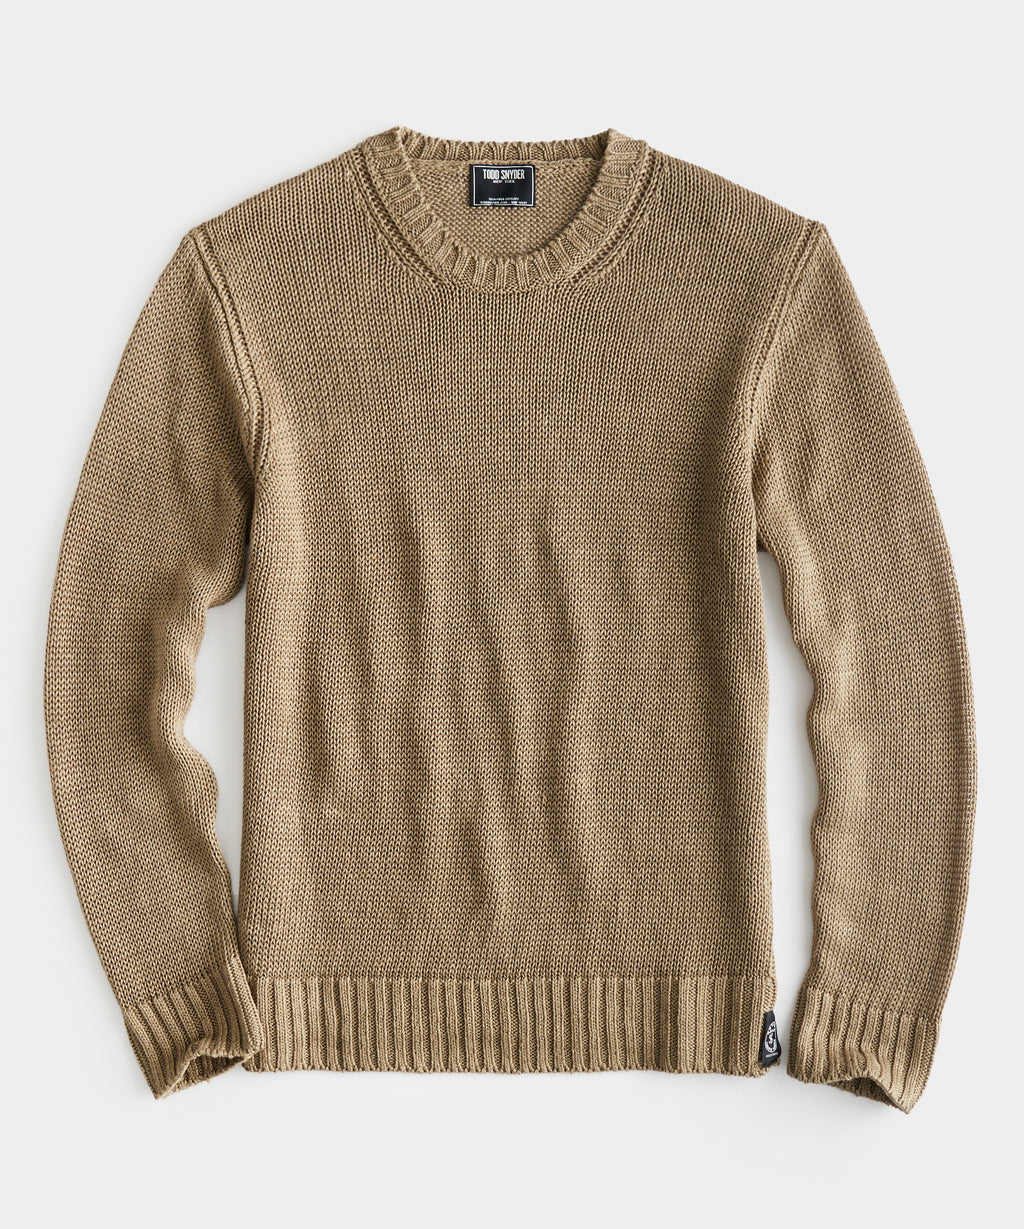 Patagonia Men's Cable-Knit Crewneck Sweater